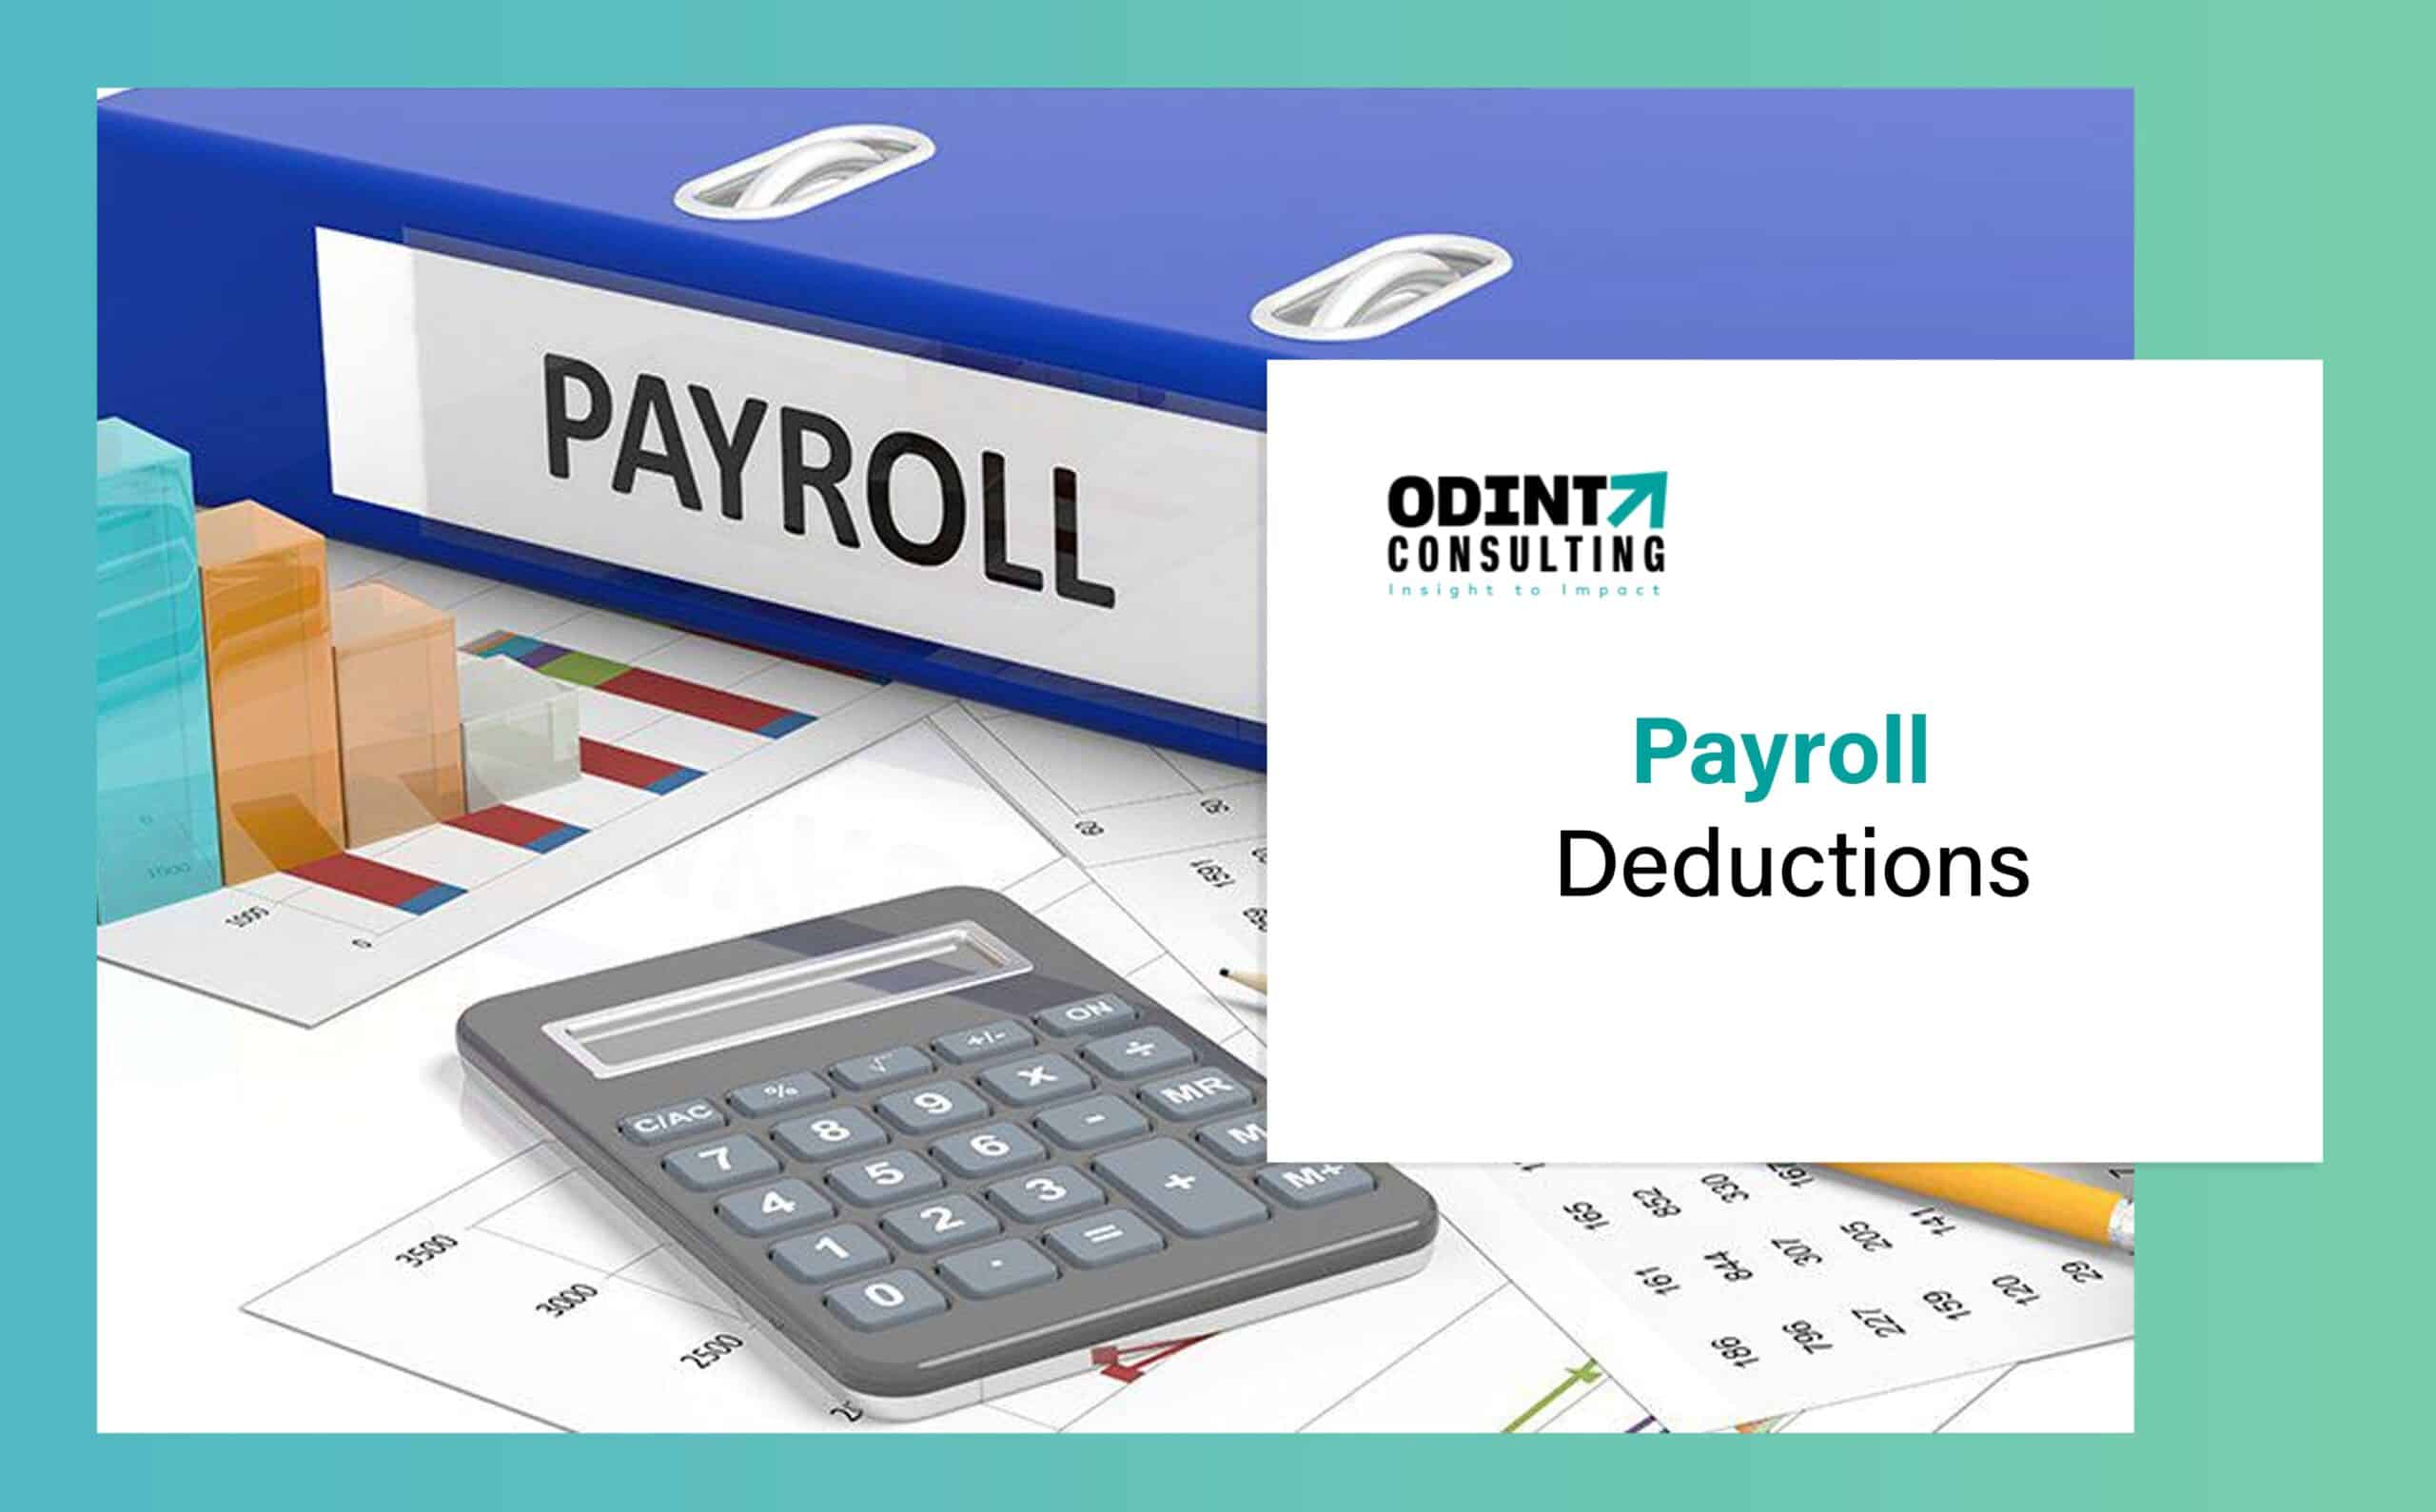 Payroll Deductions: Definition, Types & Mandatory Deductions